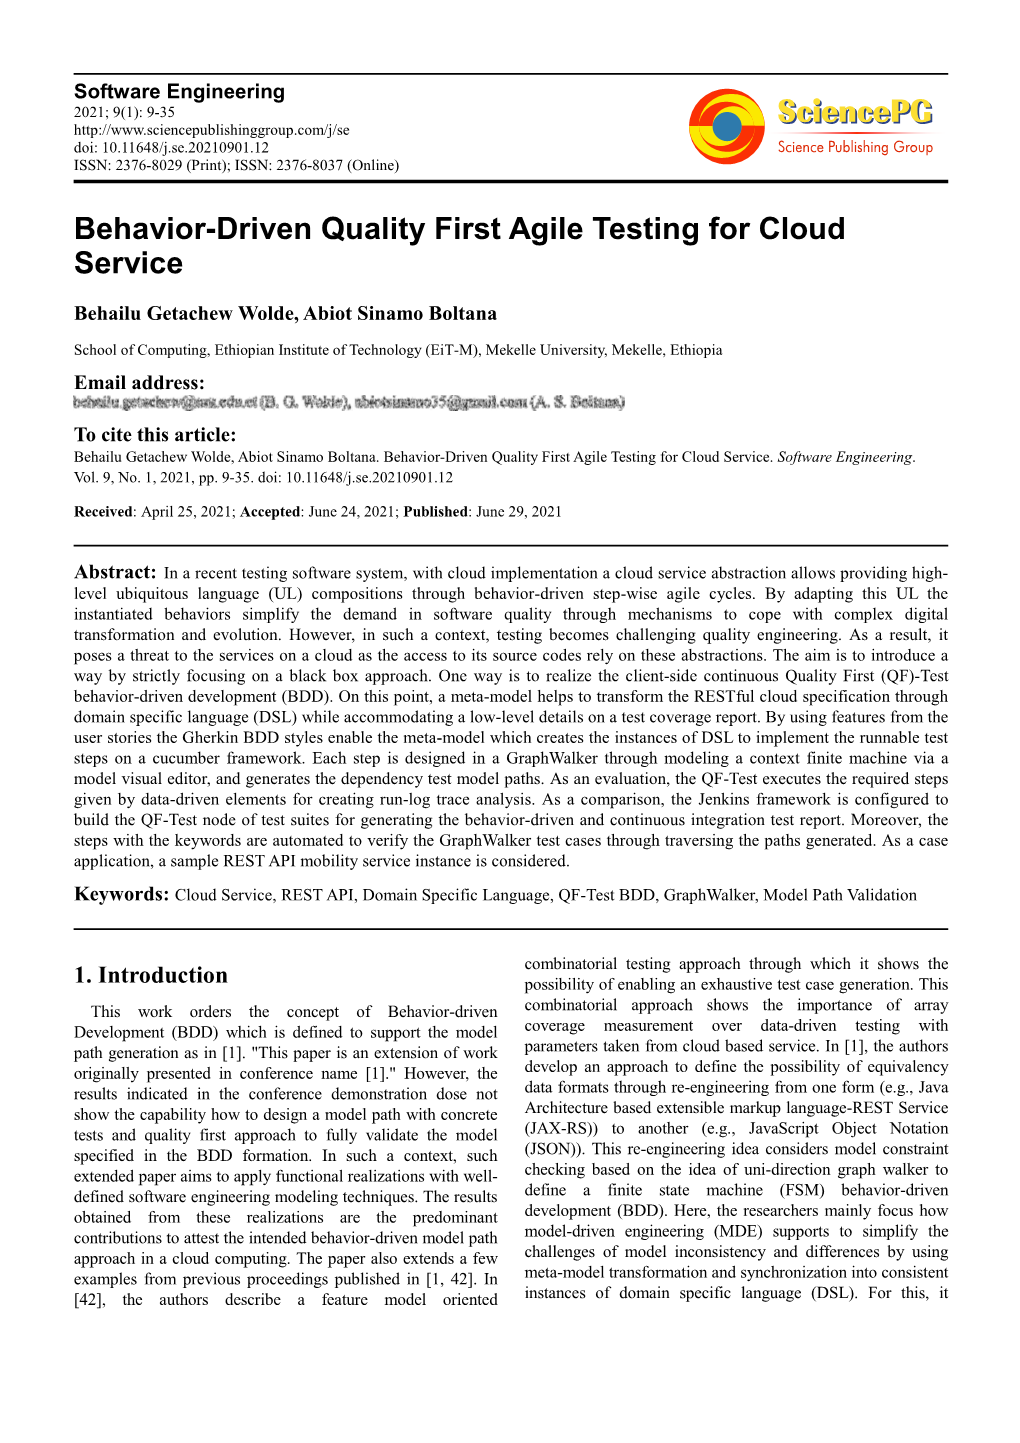 Behavior-Driven Quality First Agile Testing for Cloud Service